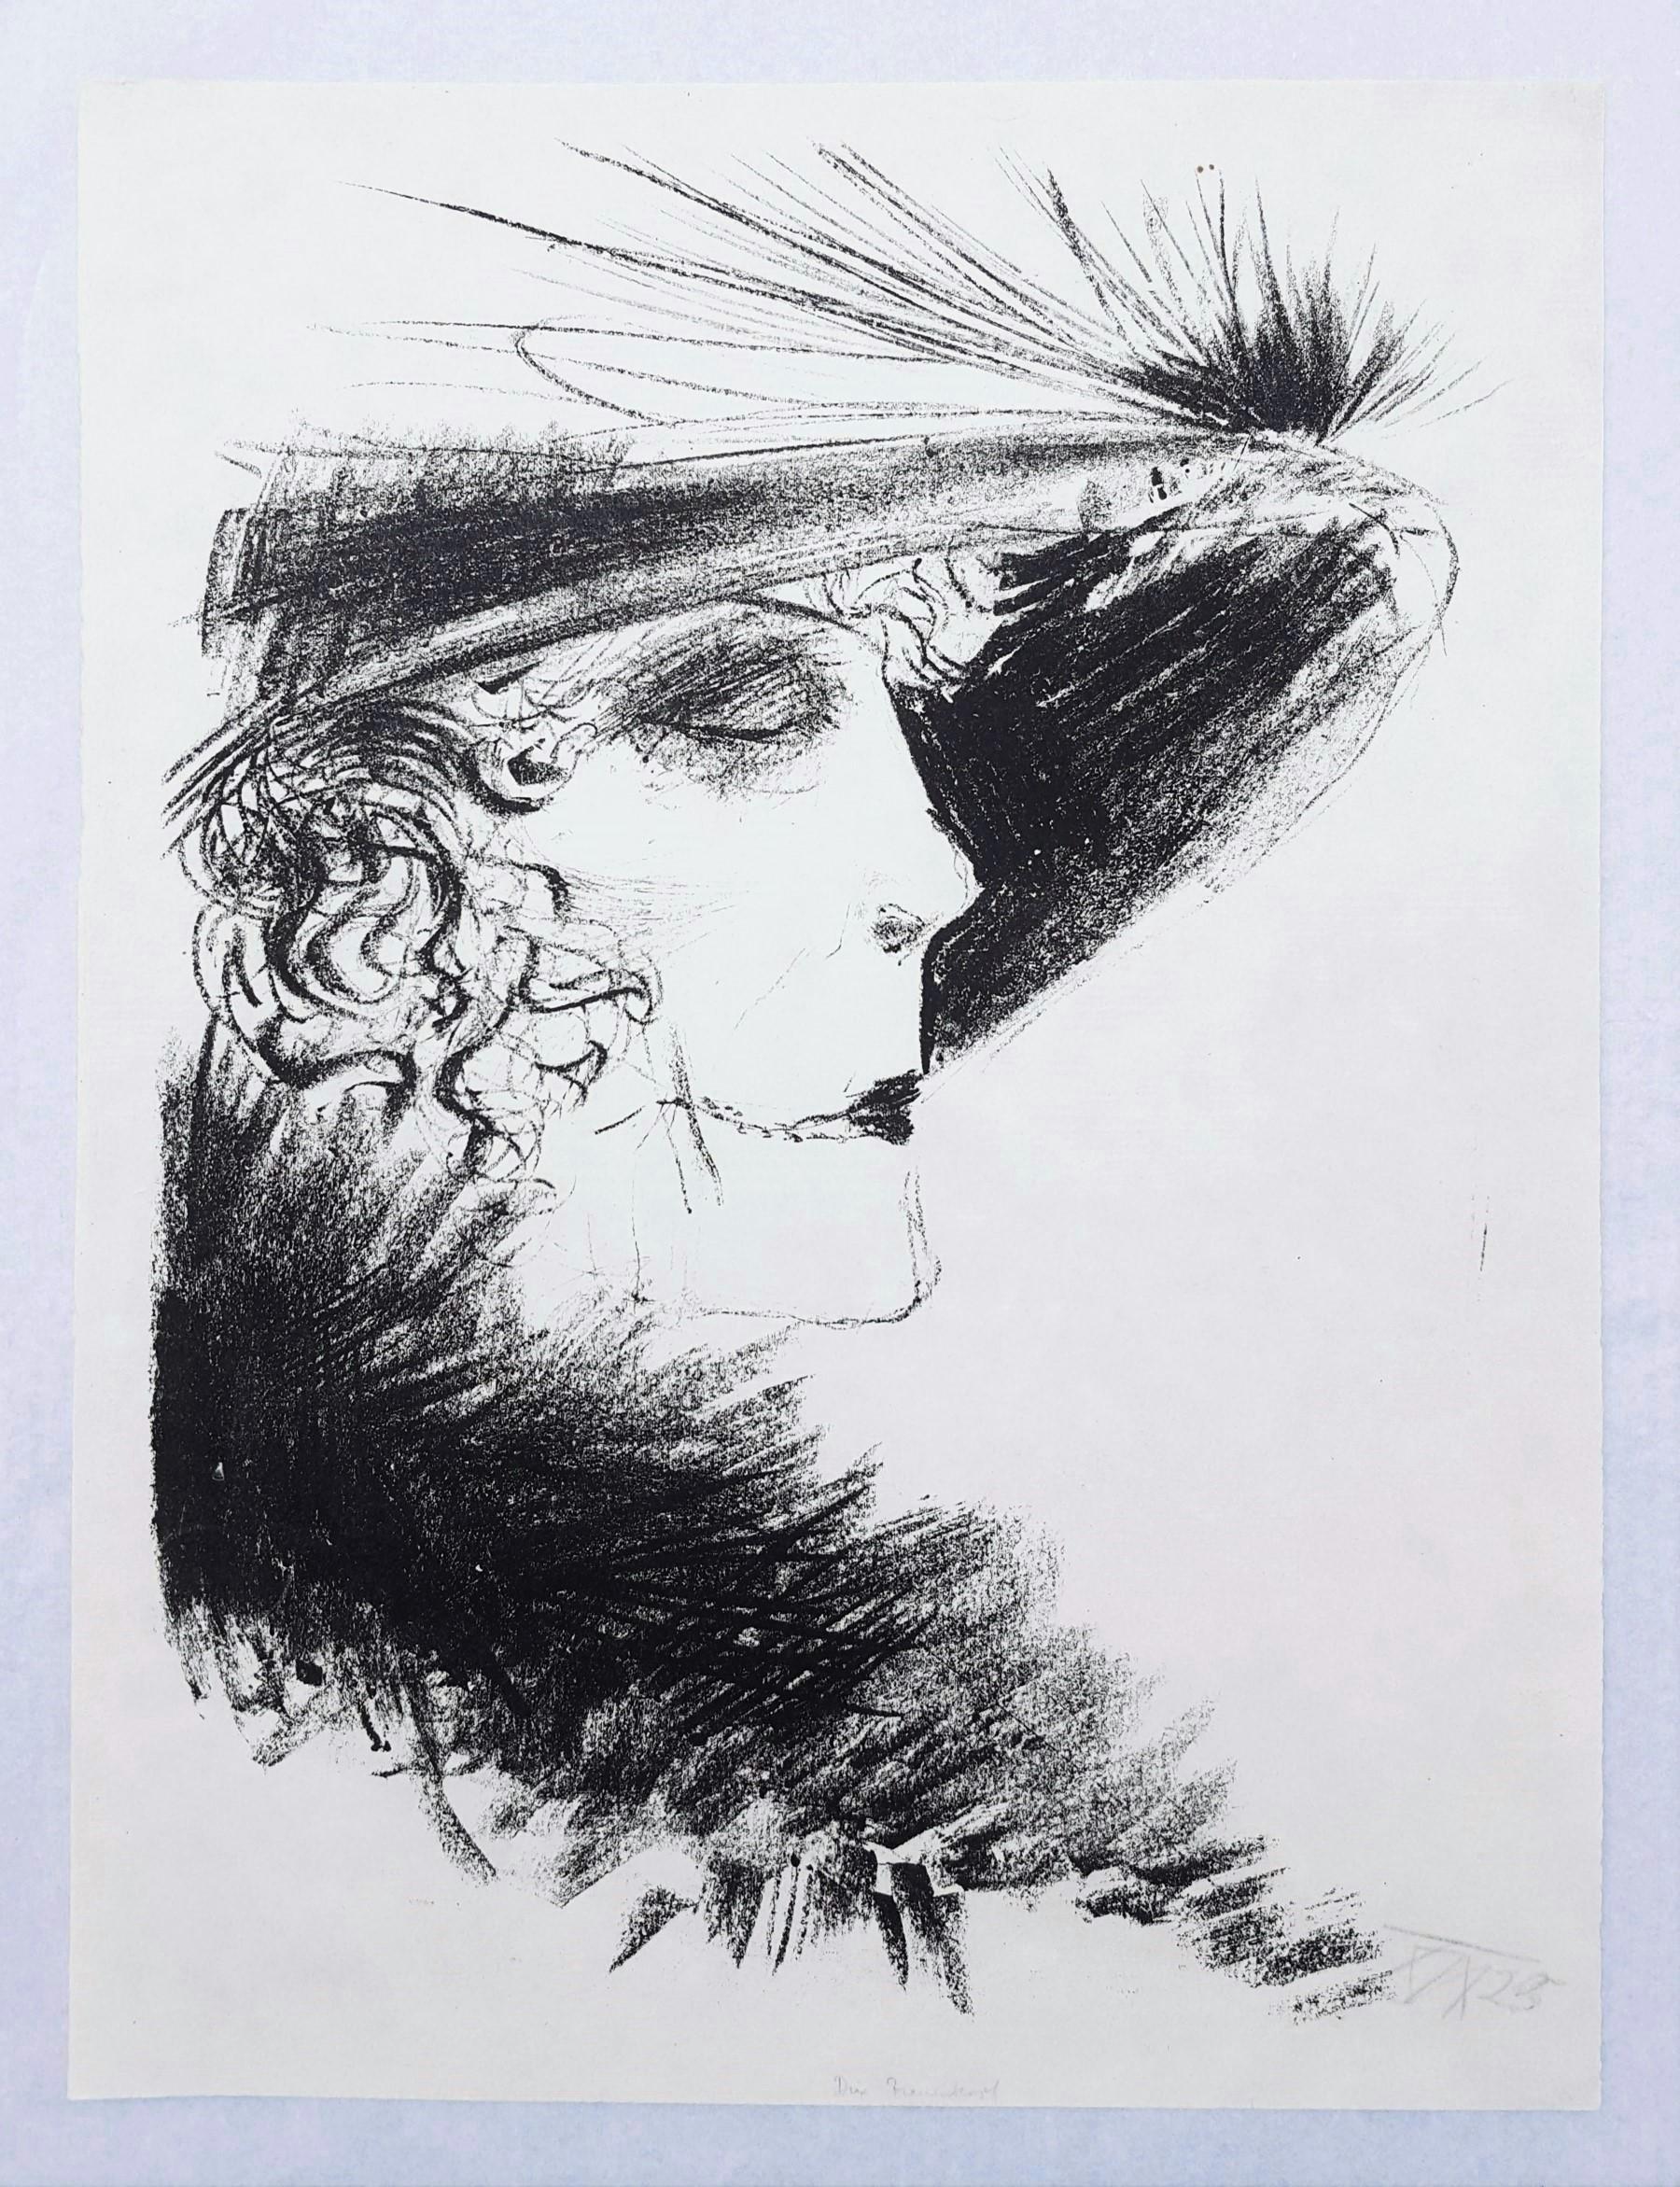 Dame mit Reiher (Woman with a Tuft of Heron Feathers) /// Expressionnisme allemand - Print de Otto Dix